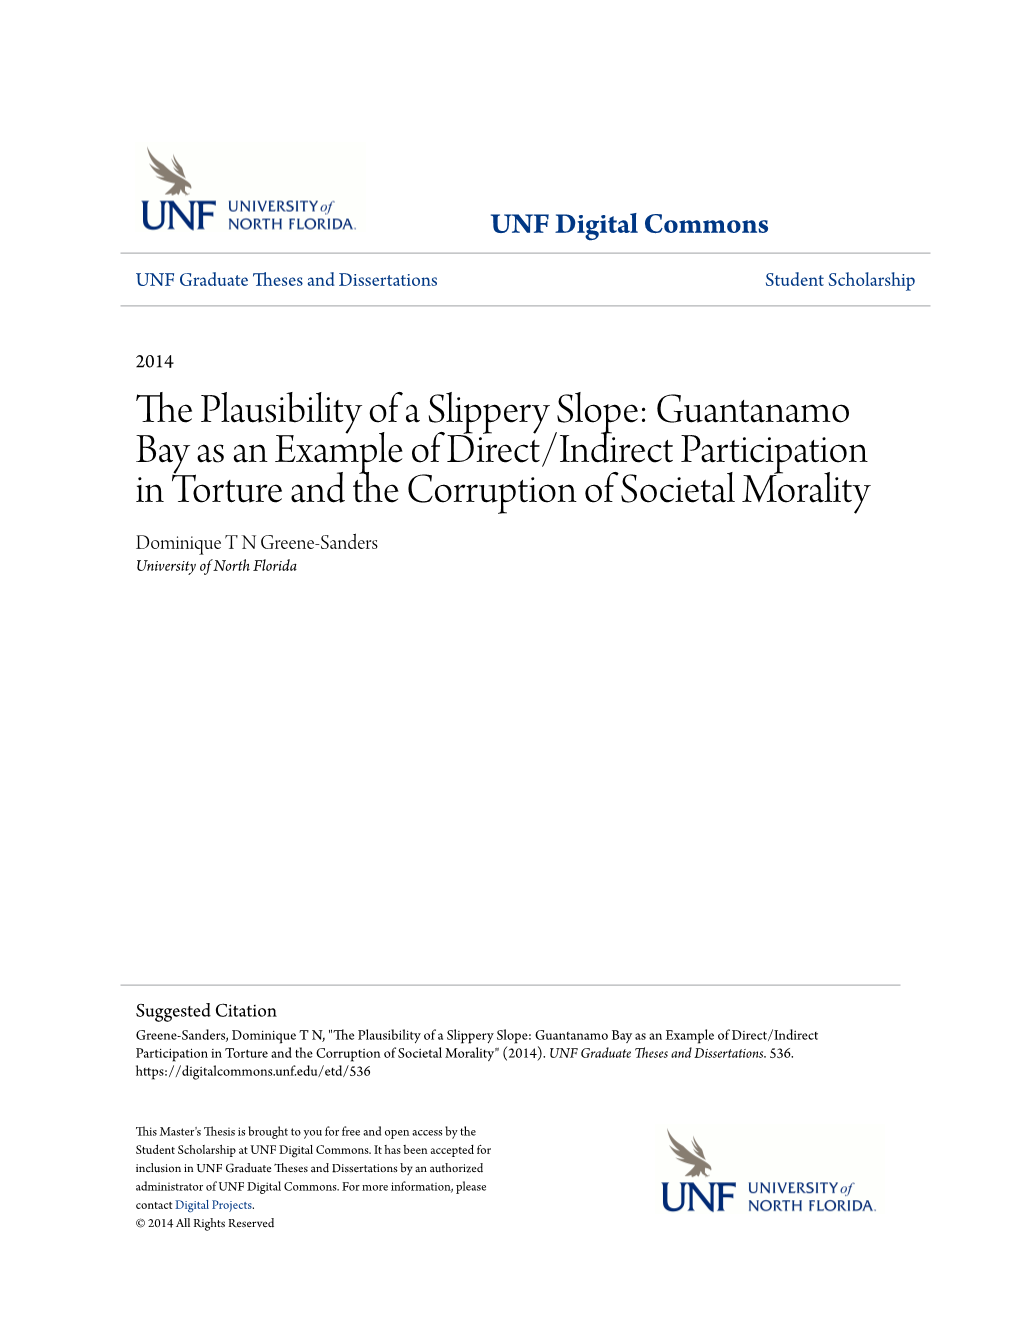 The Plausibility of a Slippery Slope: Guantanamo Bay As an Example of Direct/Indirect Participation in Torture and the Corruption of Societal Morality